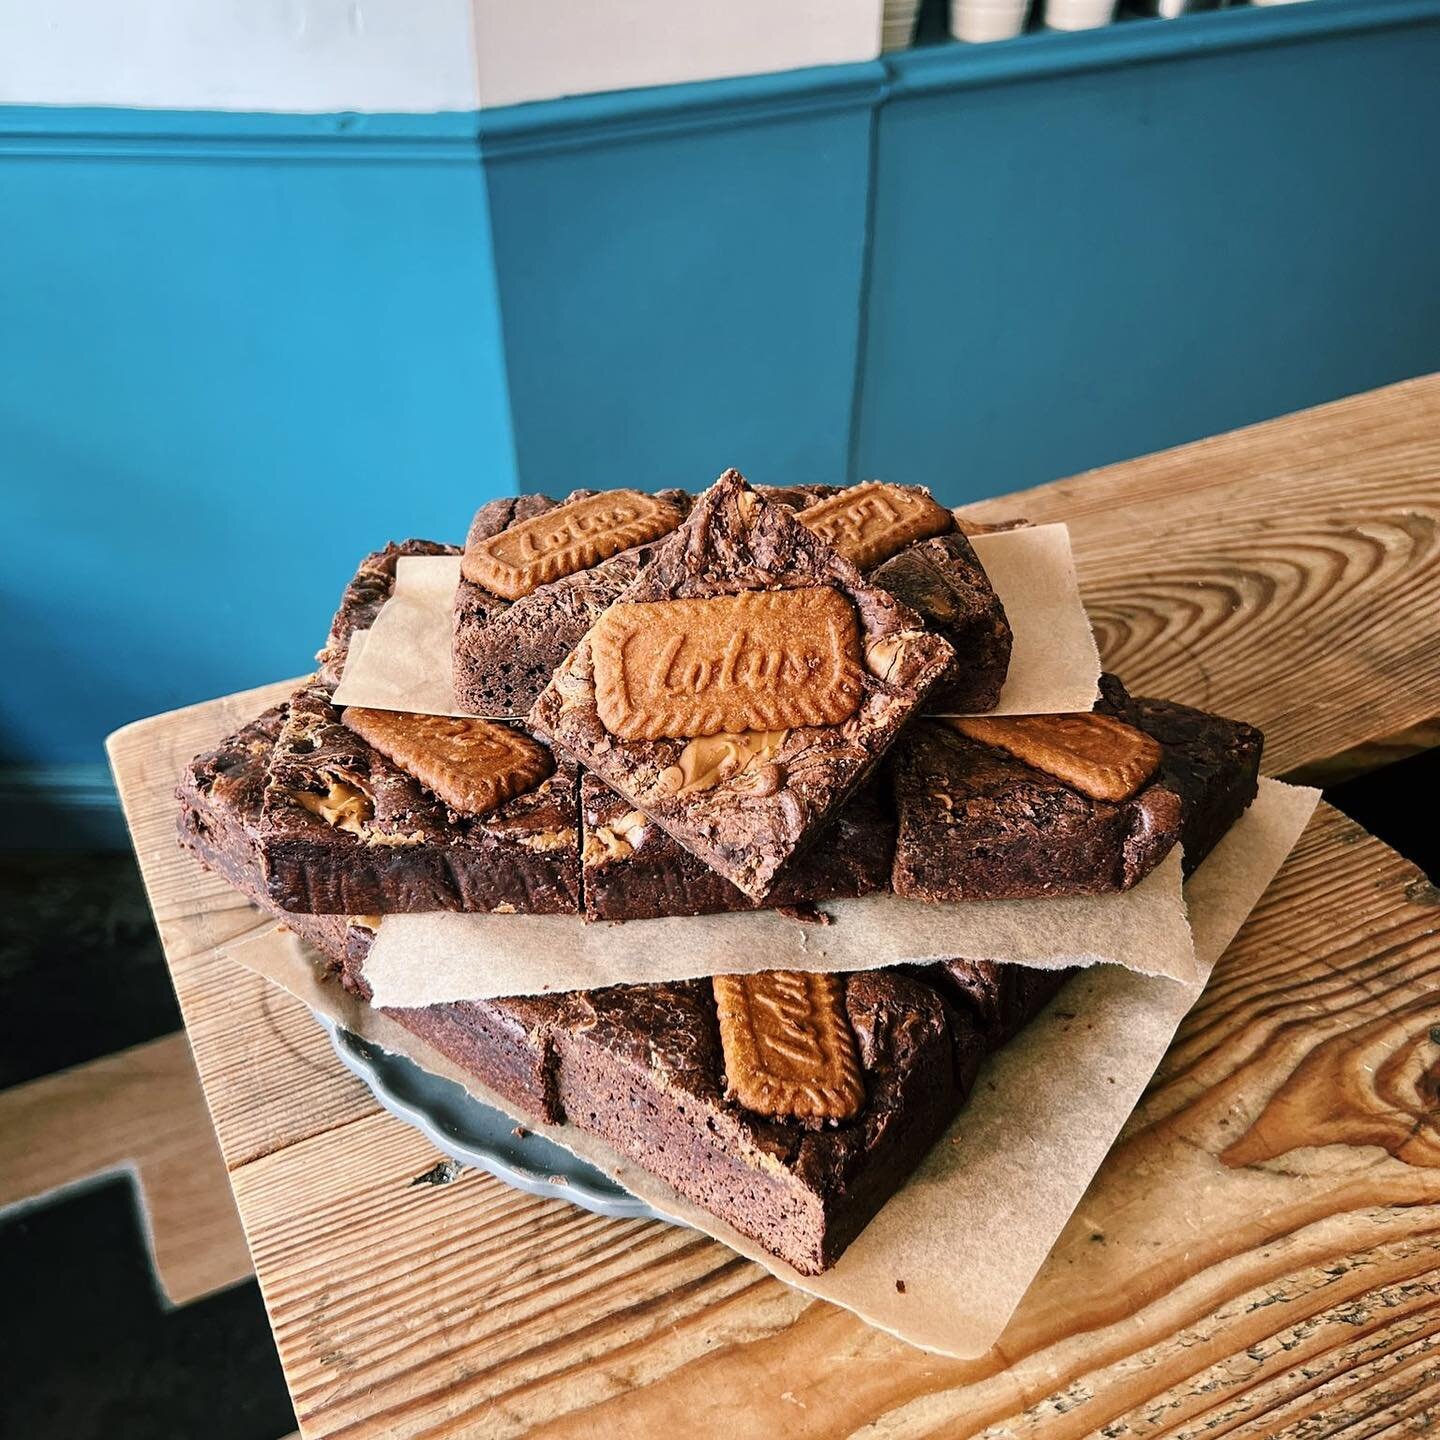 vegan biscoff brownies on sale all day, every day. slightly warmed up is a secret delight 🤫 

.
.
.
.
.
.
.
.
.
.
.
.
.
#nottingham #notts #lovenotts #indienotts #visitnottingham #cafe #hockley #cafes #breakfast #brunch #lunch #cake #coffee #cakeand